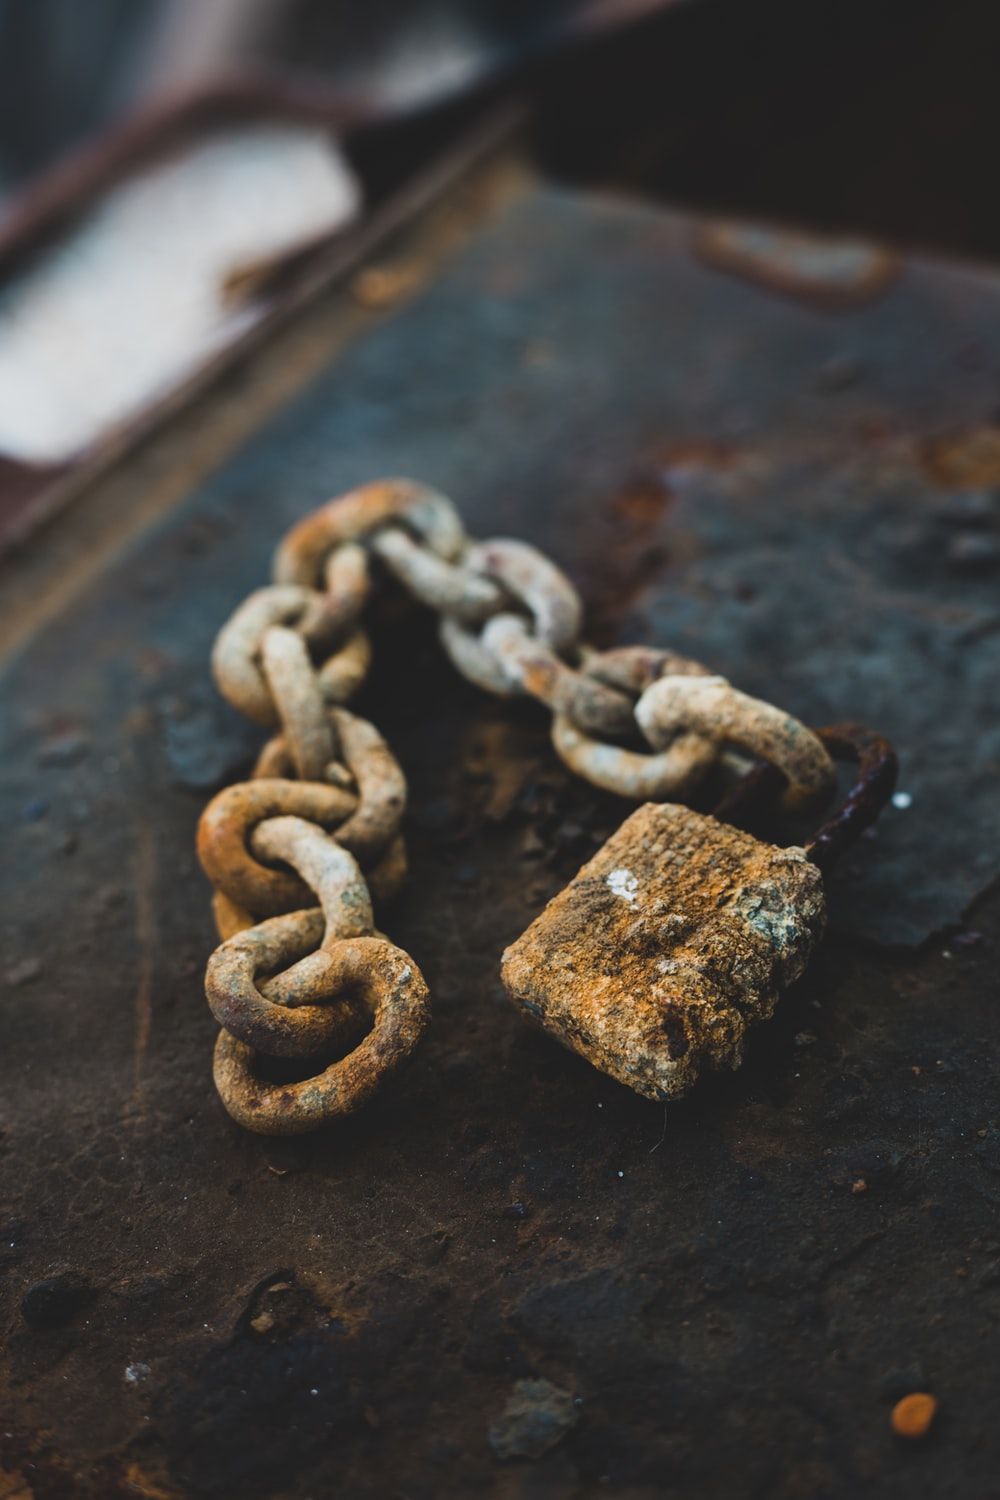 Breaking Chains Picture. Download Free Image